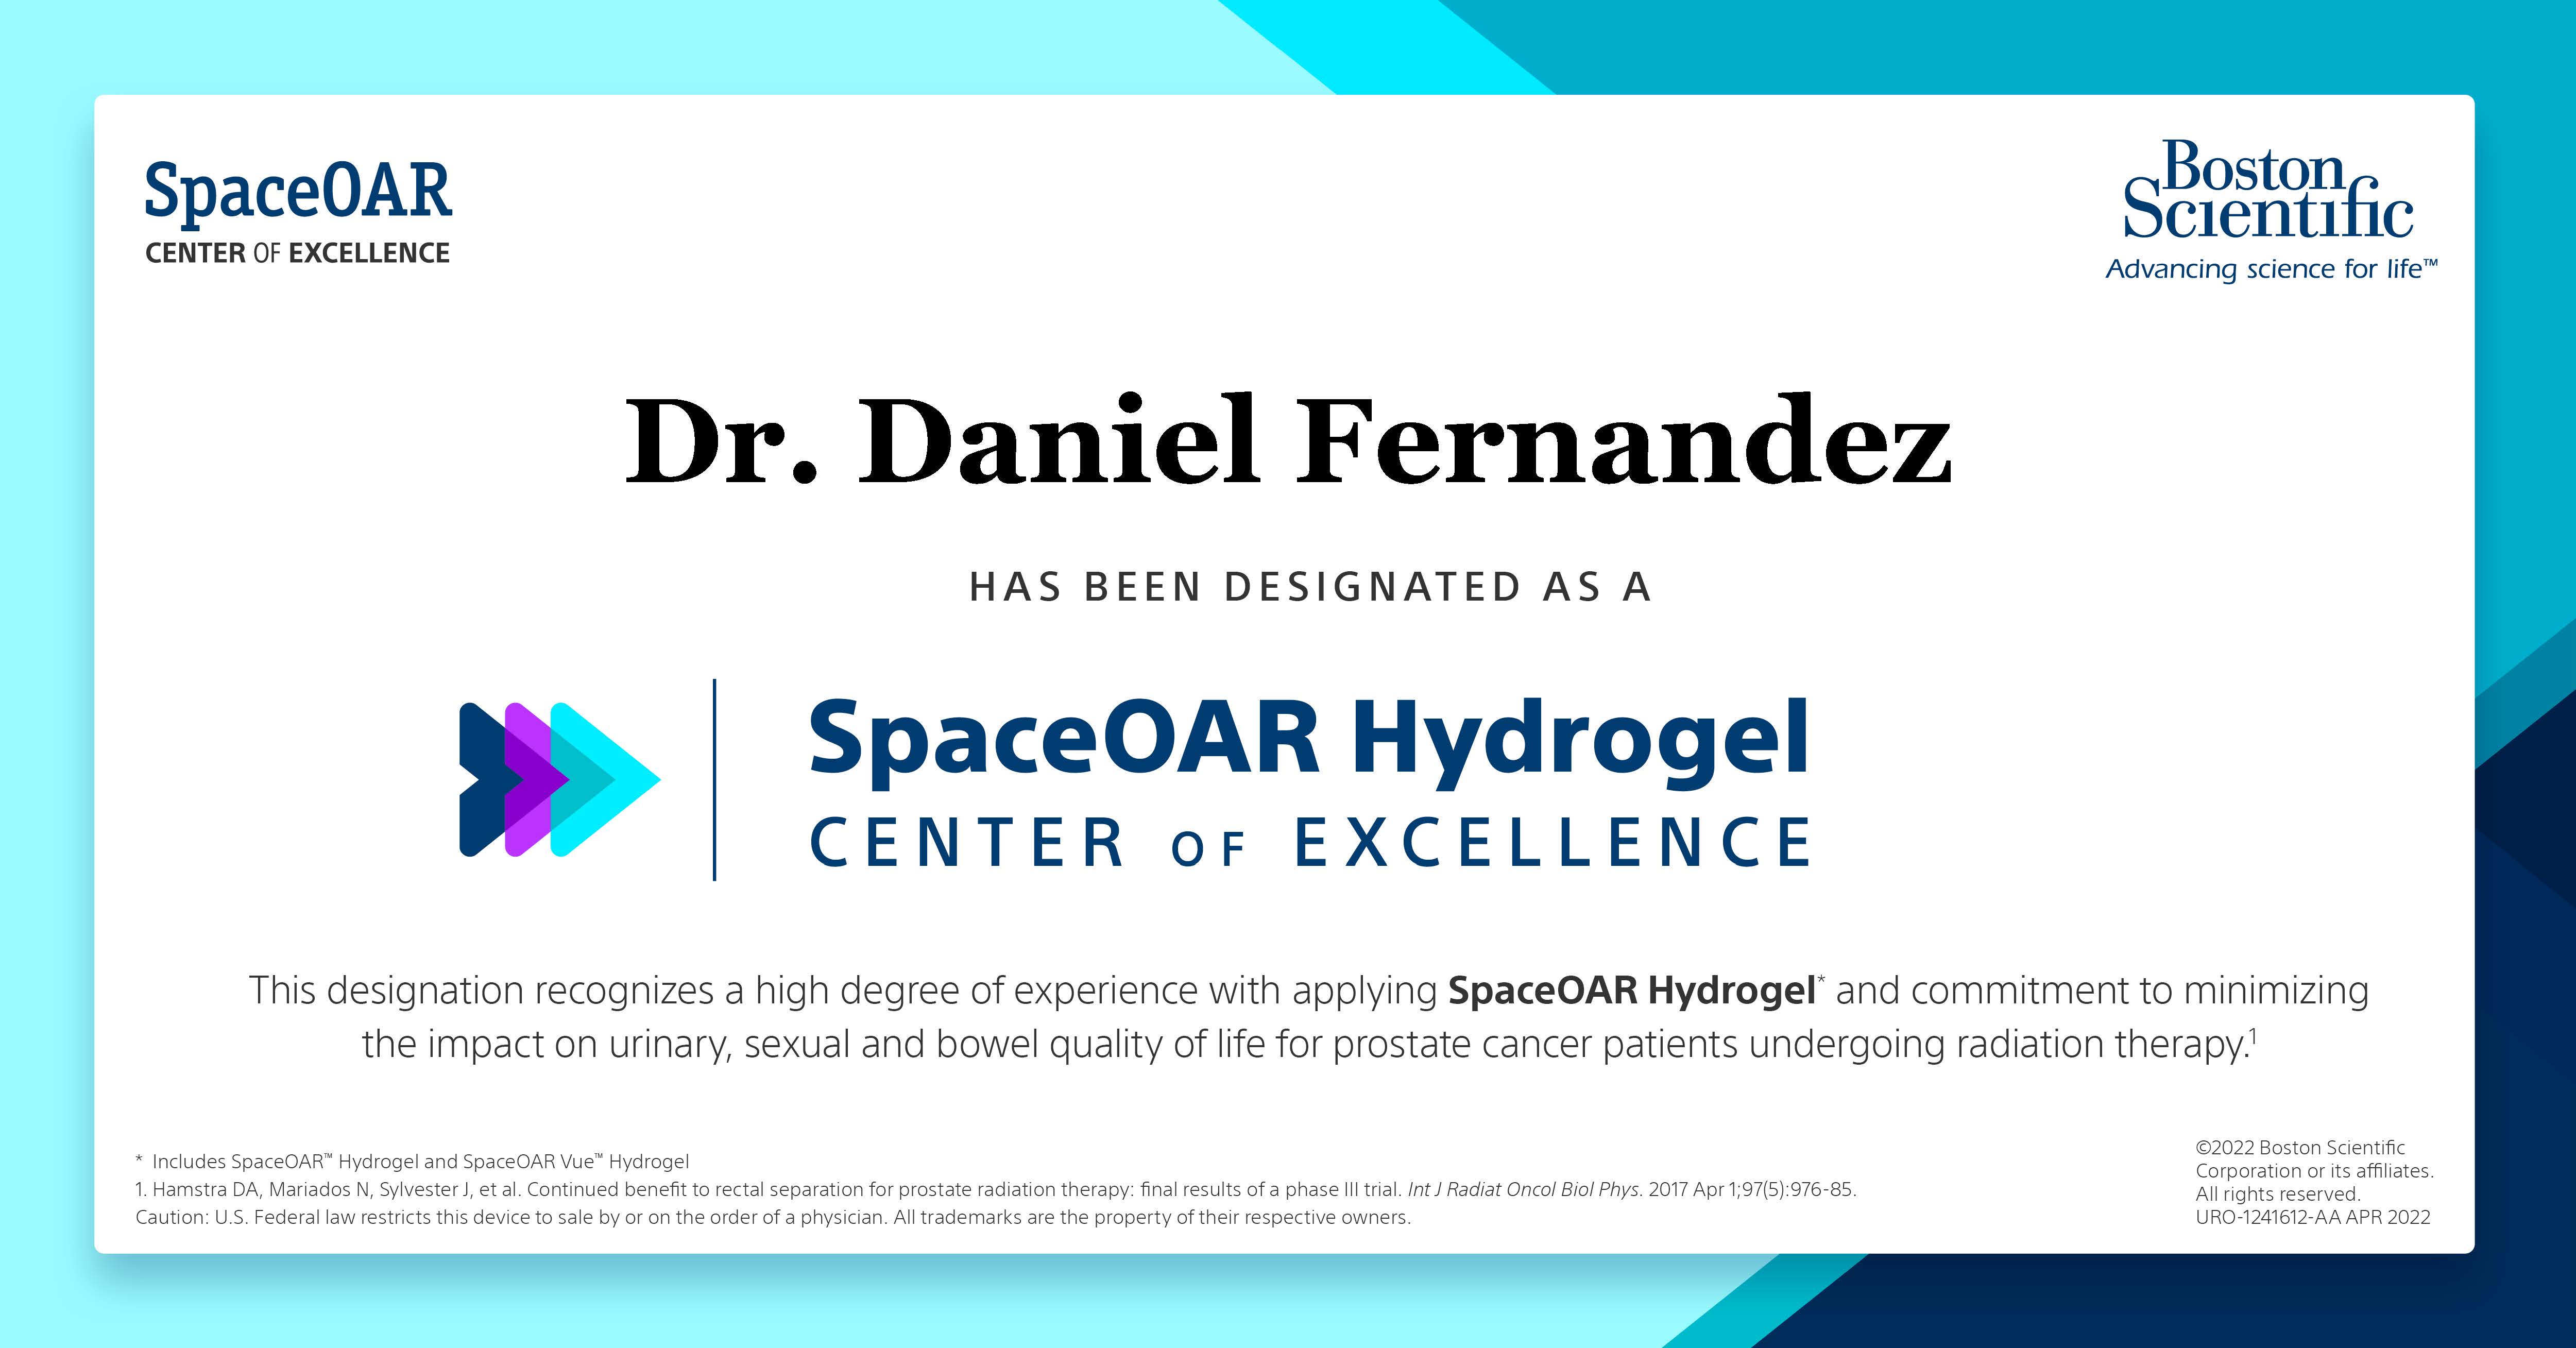 Certificate for Dr. Dan Fernandez Recognized as Center of Excellence for SpaceOAR Hydrogel